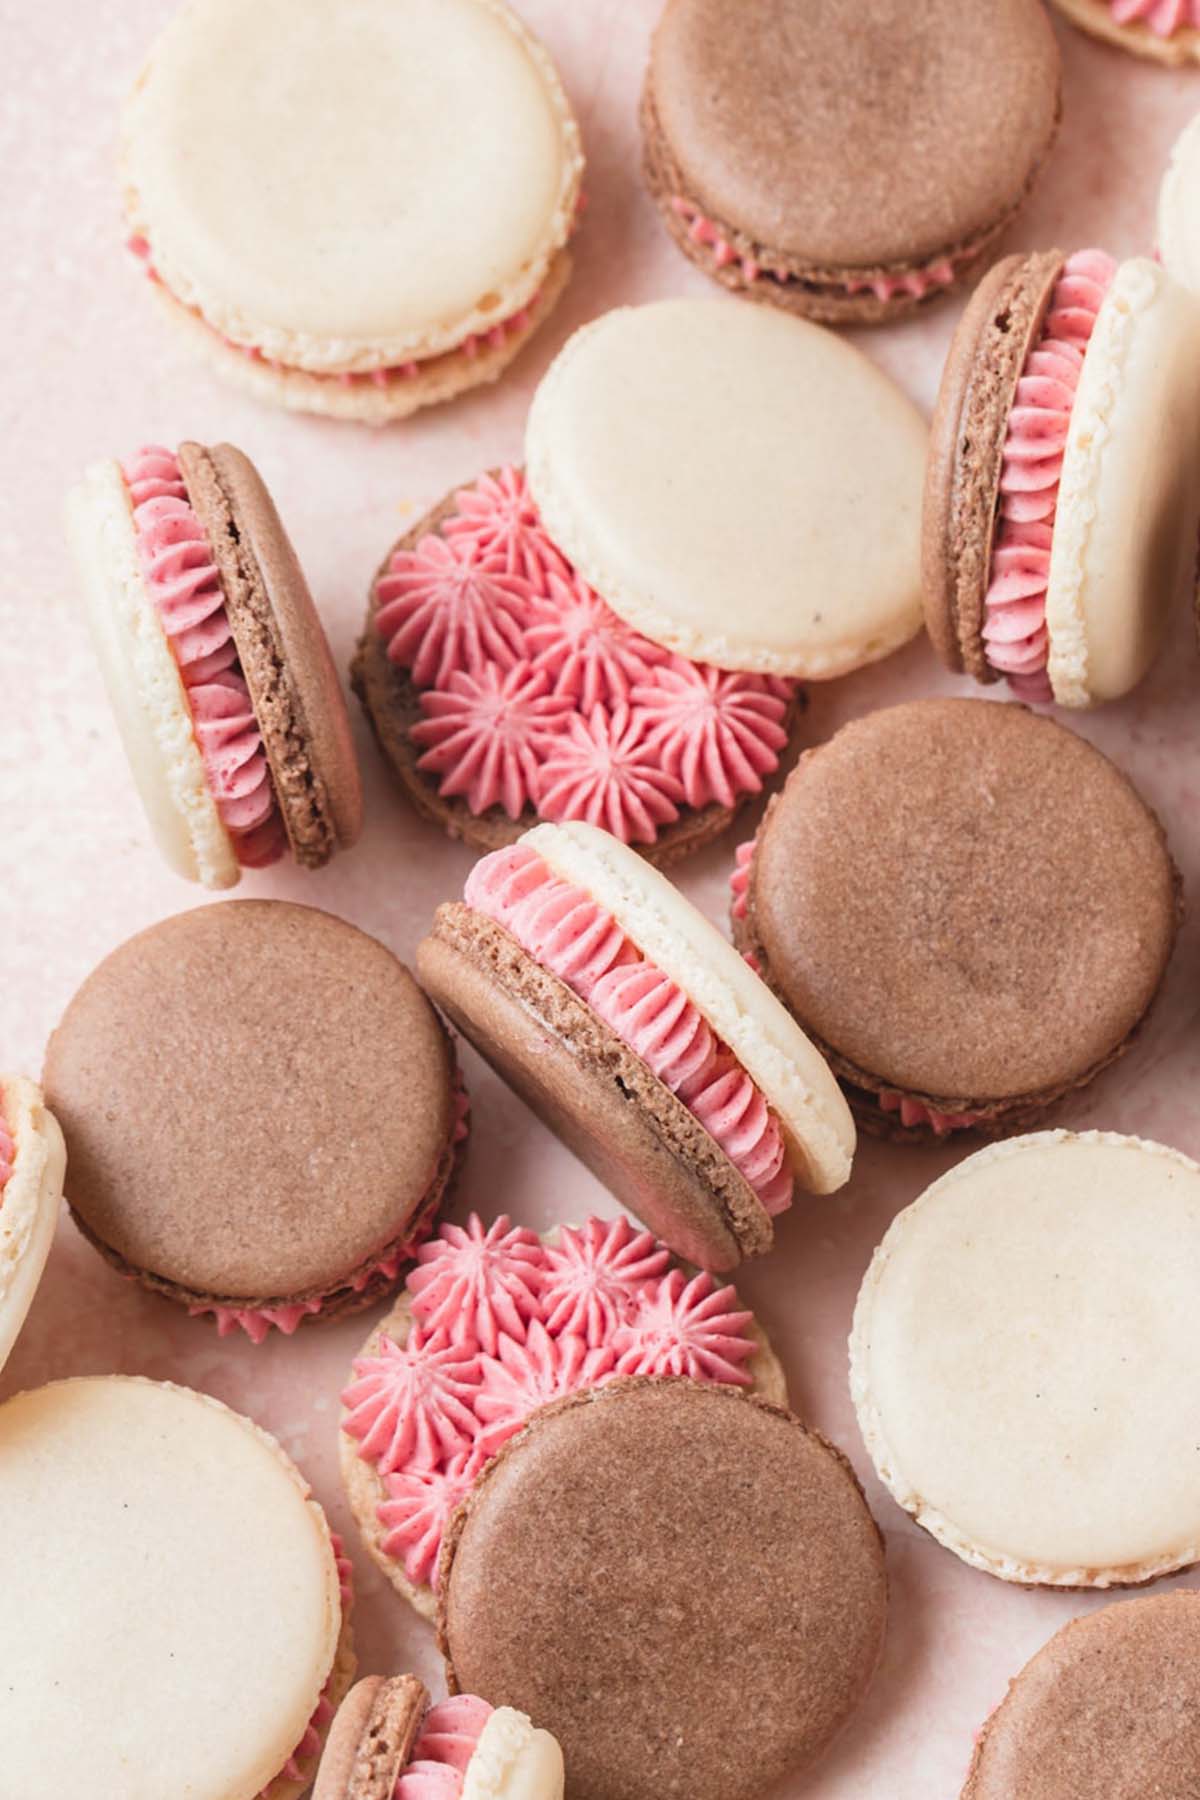 Neapolitan white and brown macaron shells with pink filling.